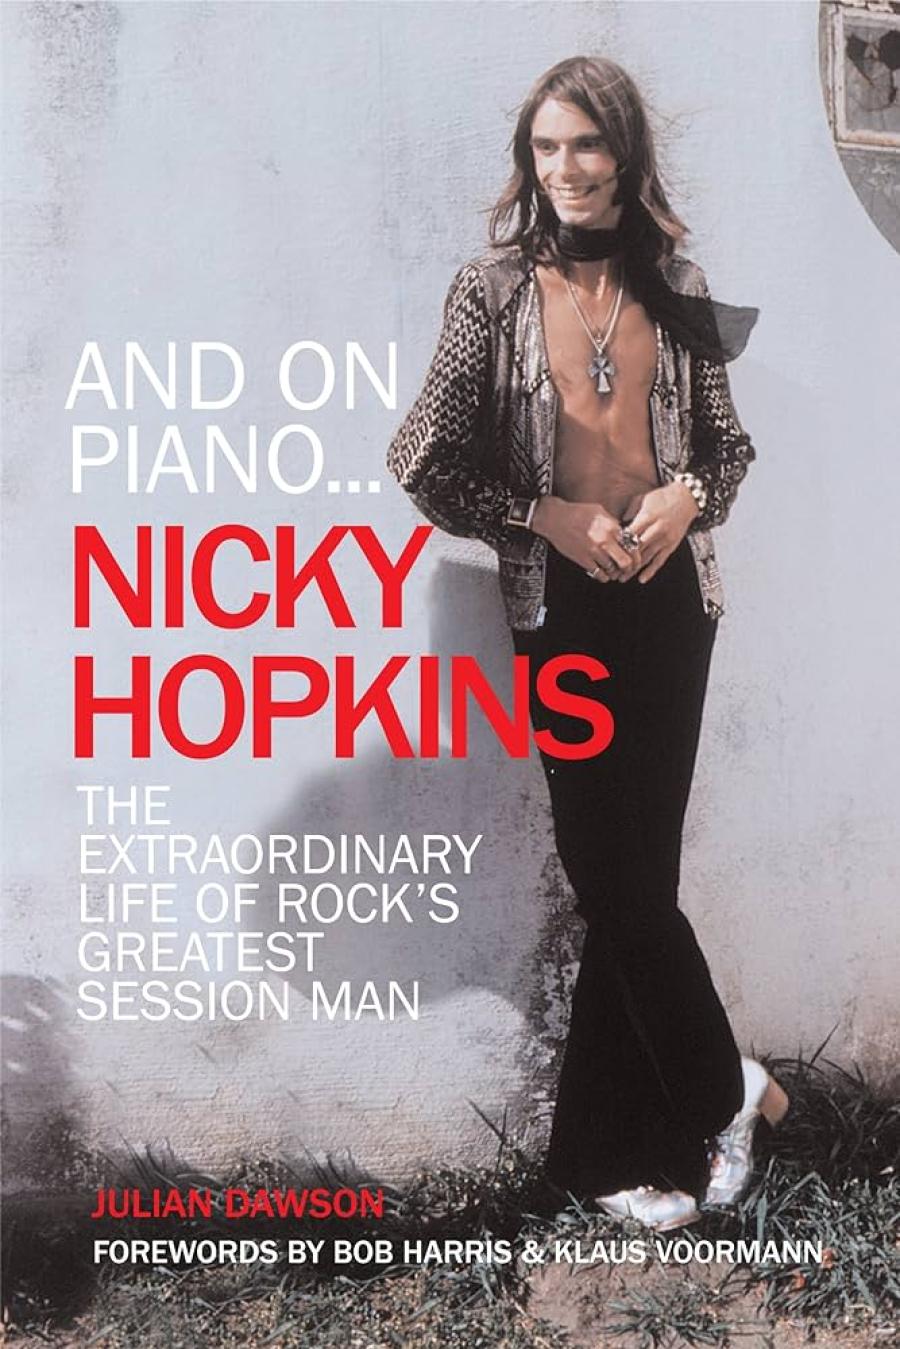 And on piano - Nicky Hopkins : the extraordinary life of rock's greatest session man